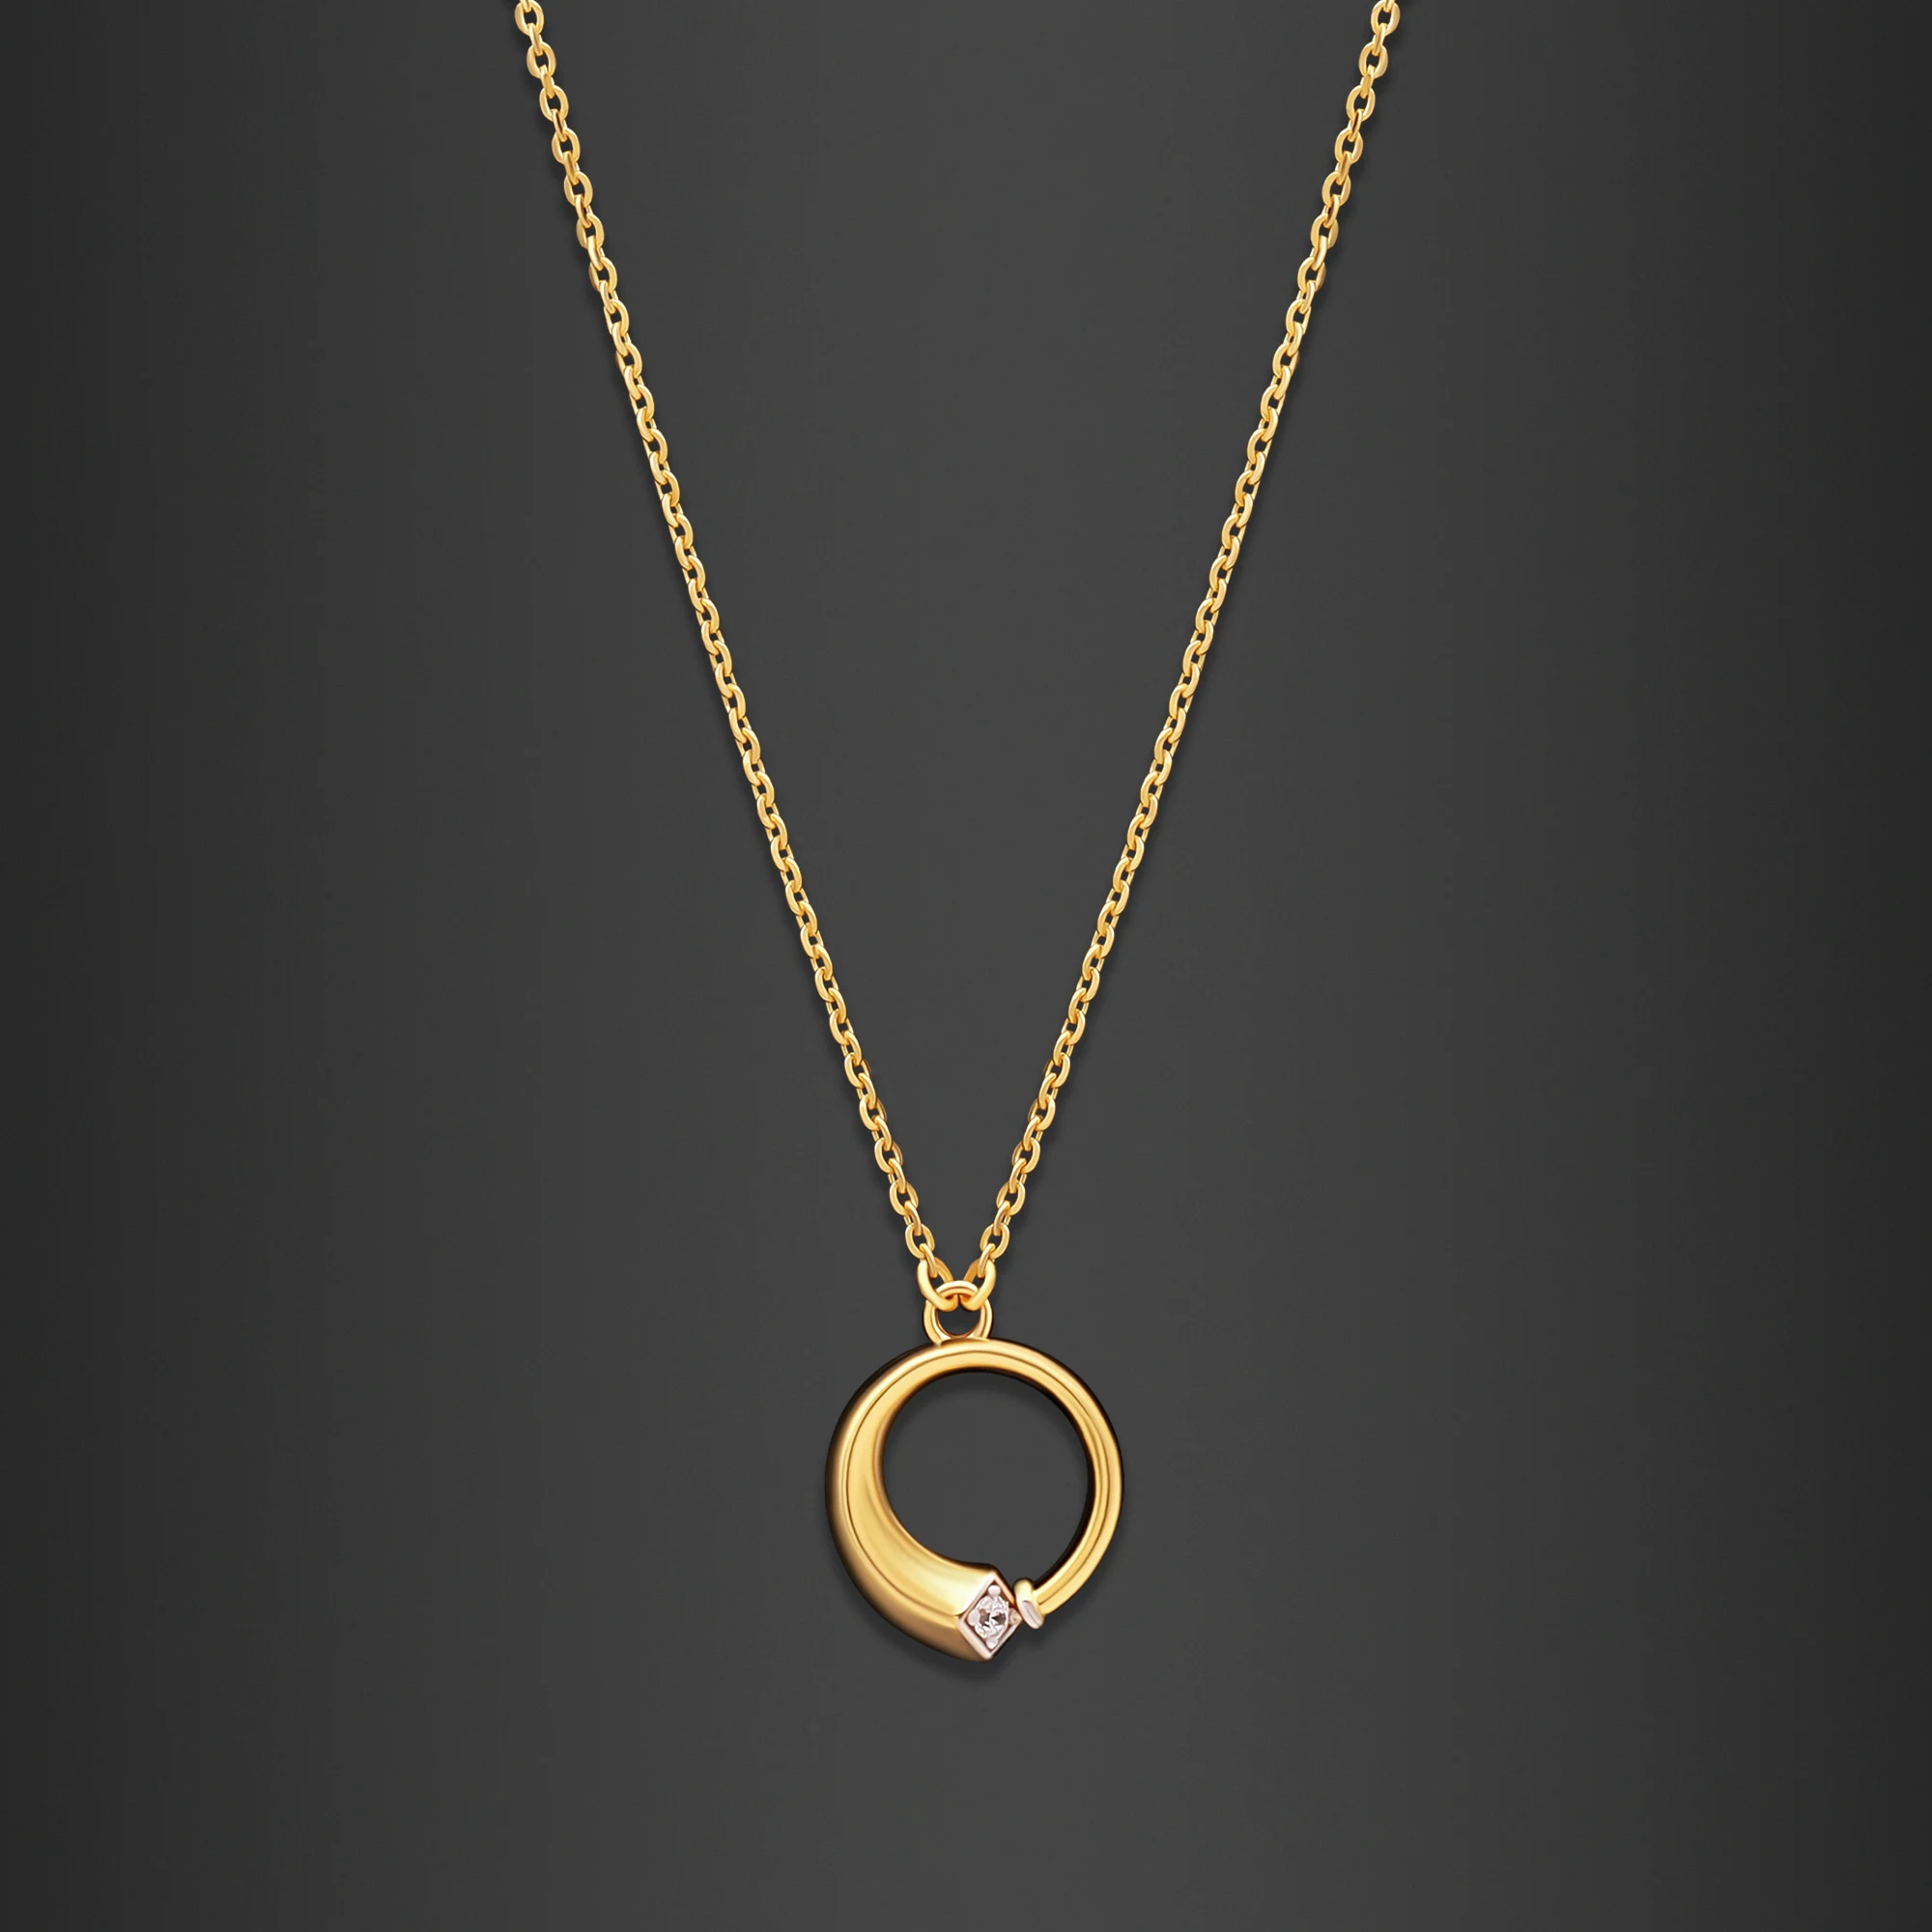 22K Gold Coiled Pendant Necklace (5.80G)